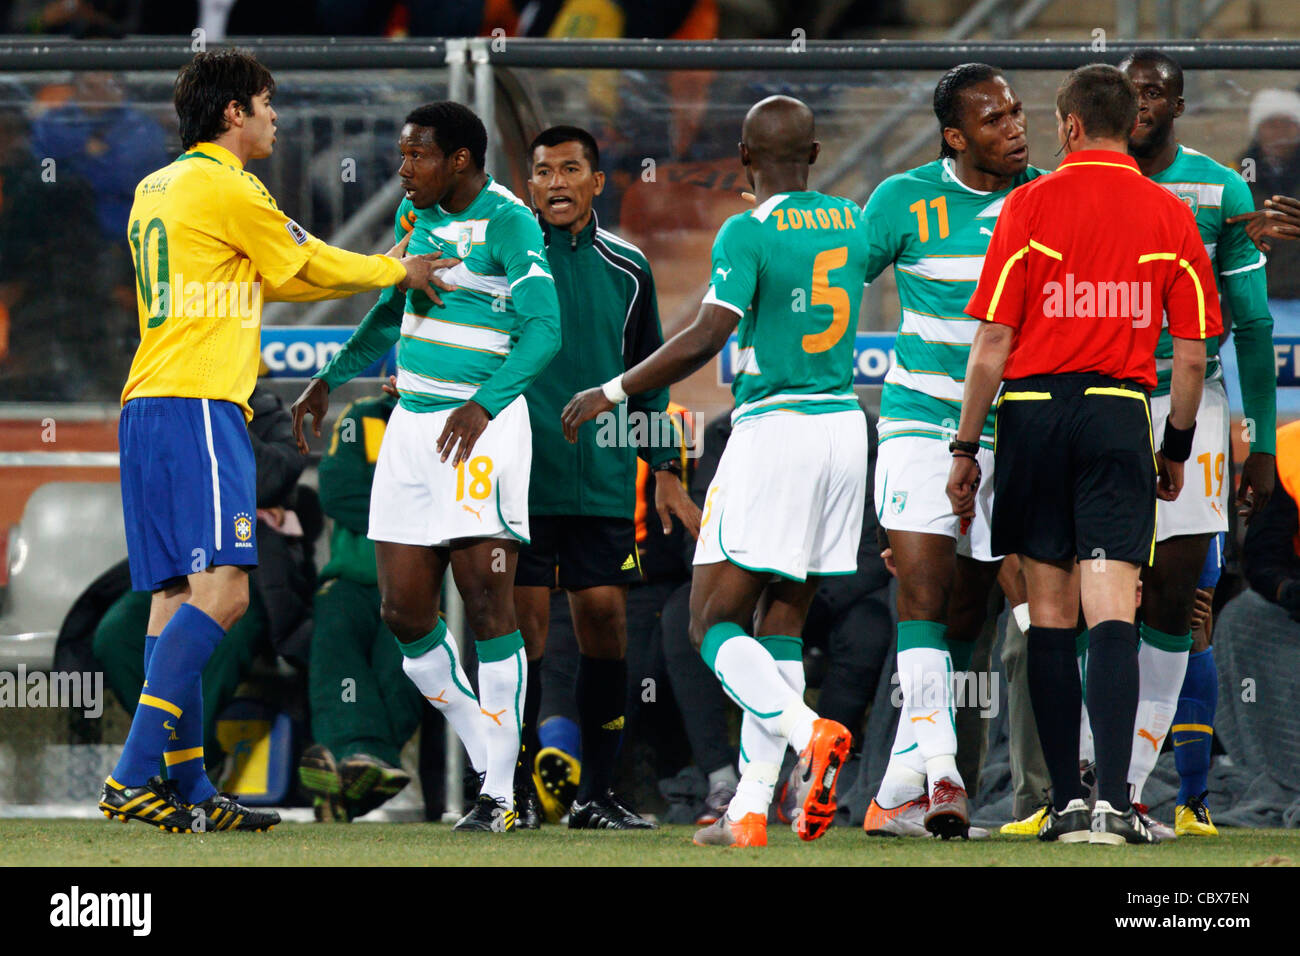 Kaka of Brazil (10) pushes Kader Keita of Ivory Coast (18) as Didier Drogba argues with referee Stephane Lannoy - '10 World Cup. Stock Photo